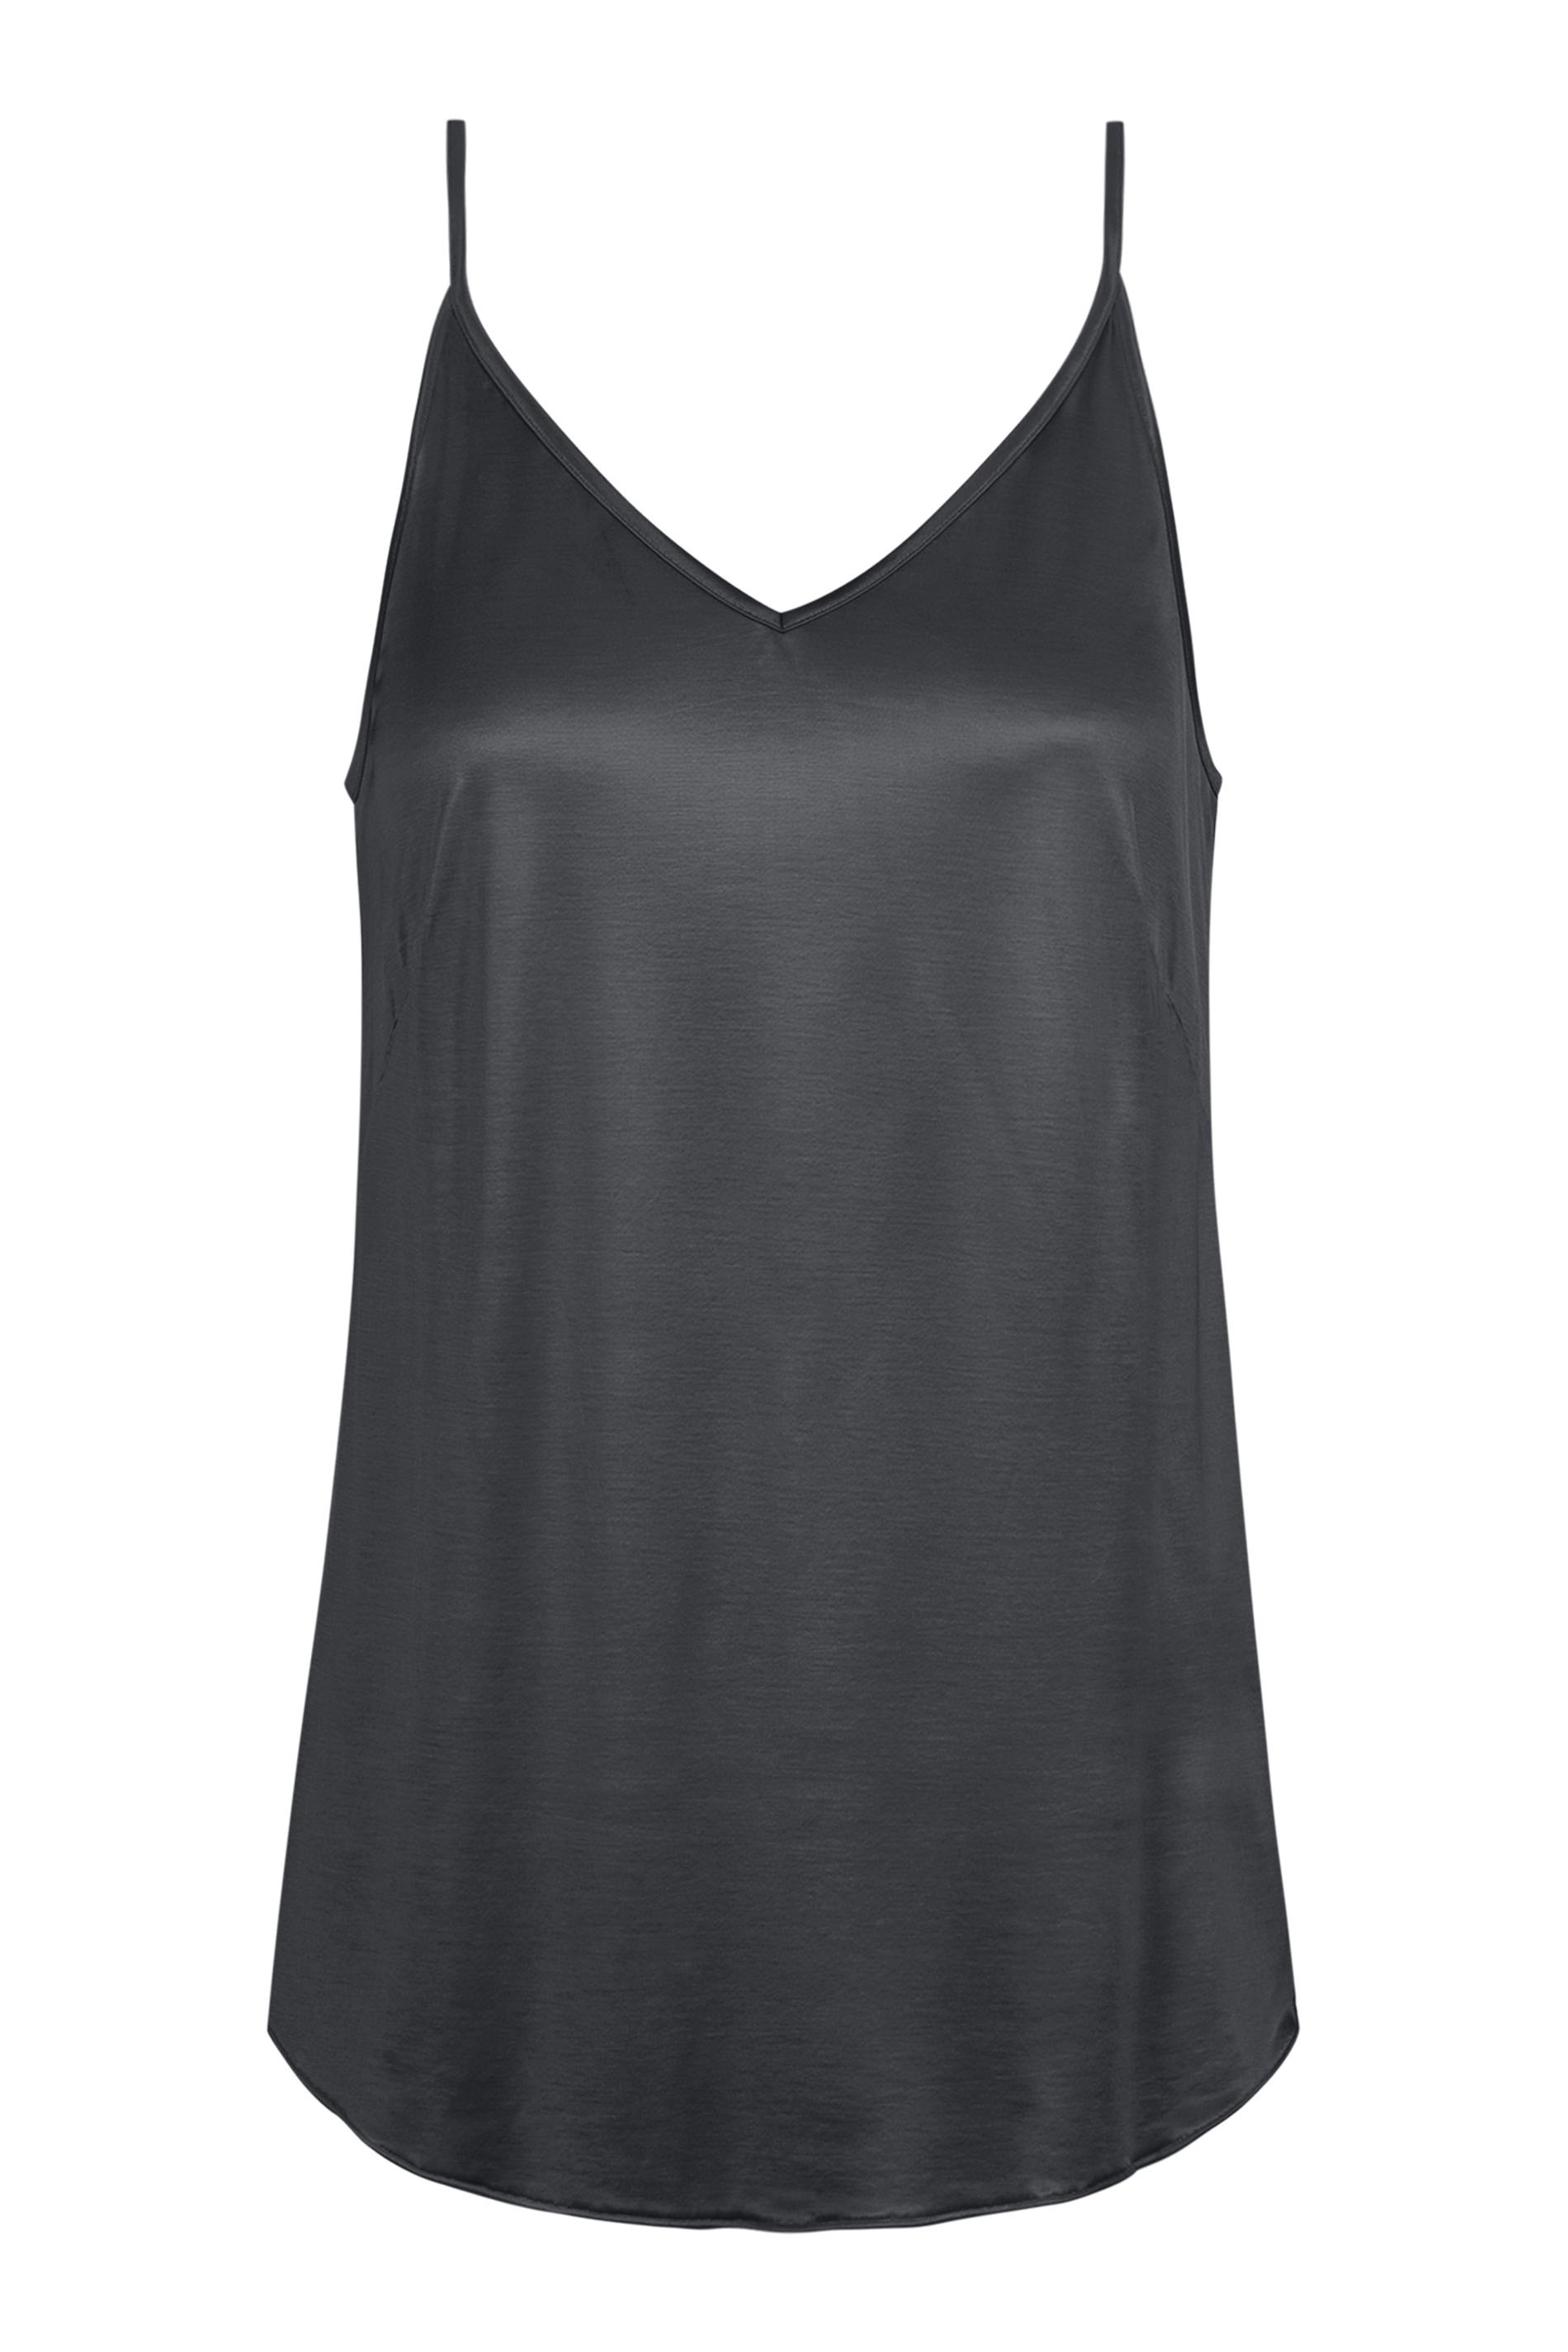 Camisole Serie Coco Uitknippen | mey®